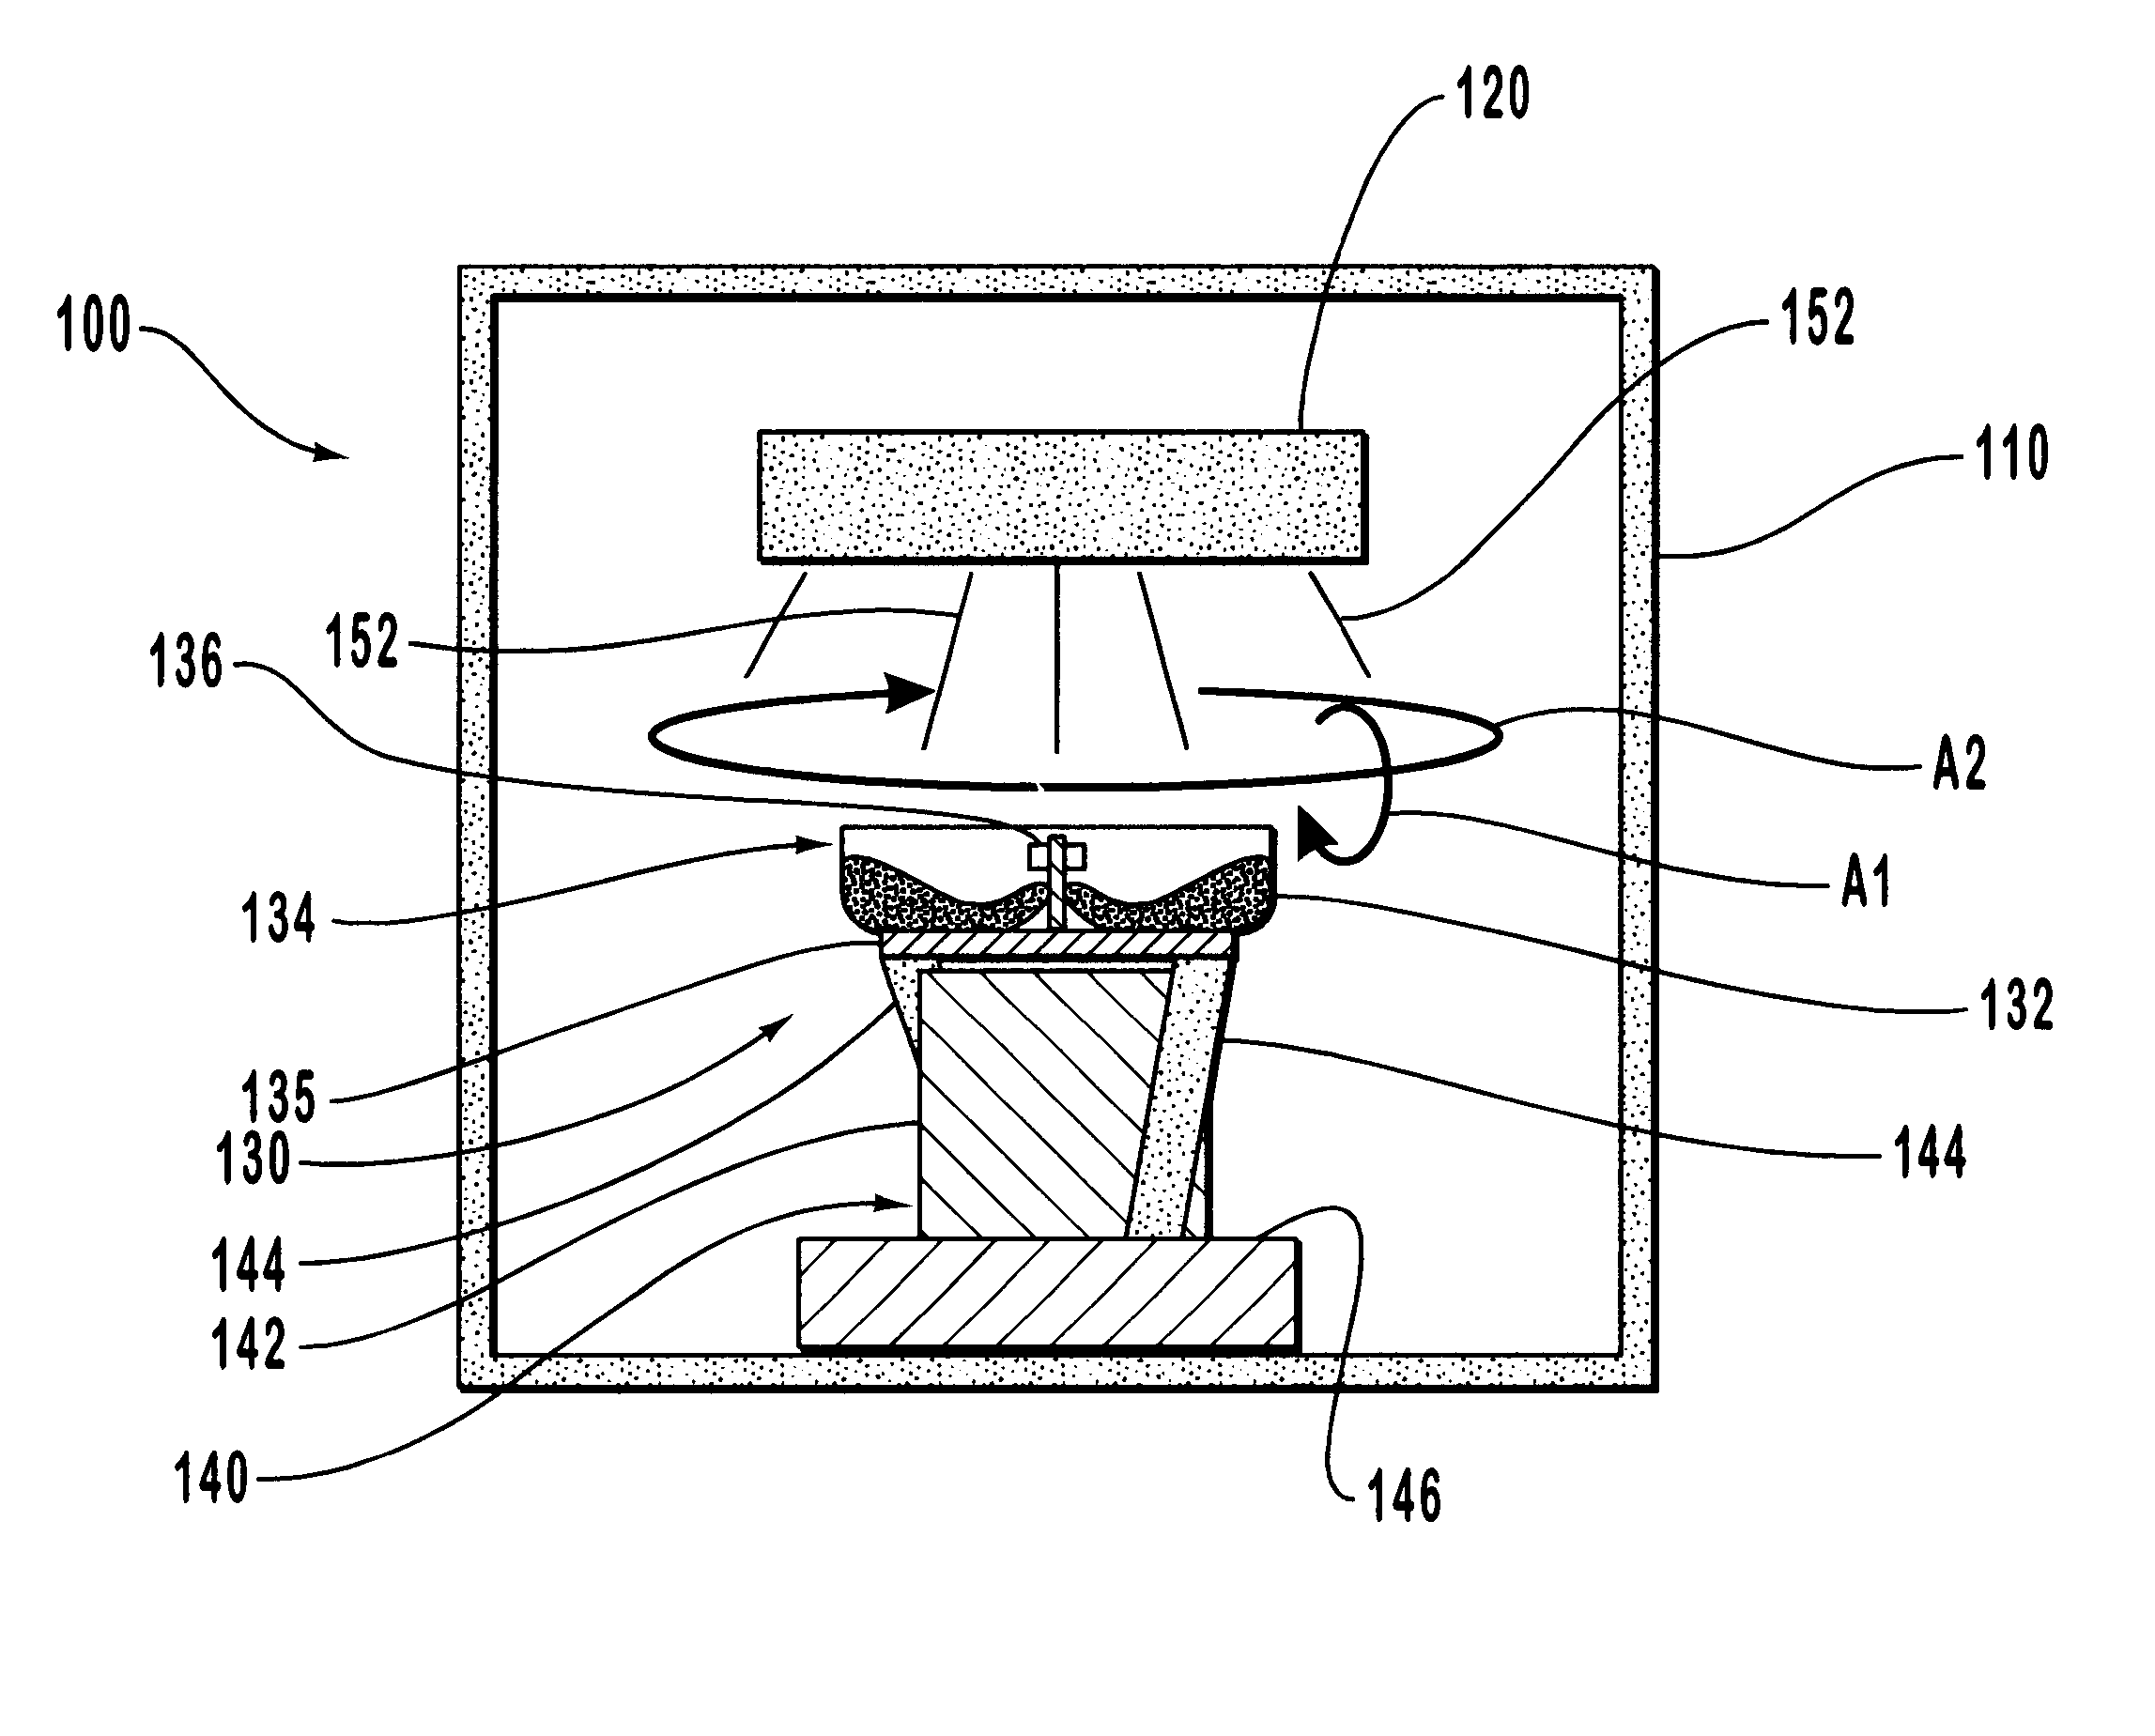 Methods and apparatus for producing enhanced interference pigments